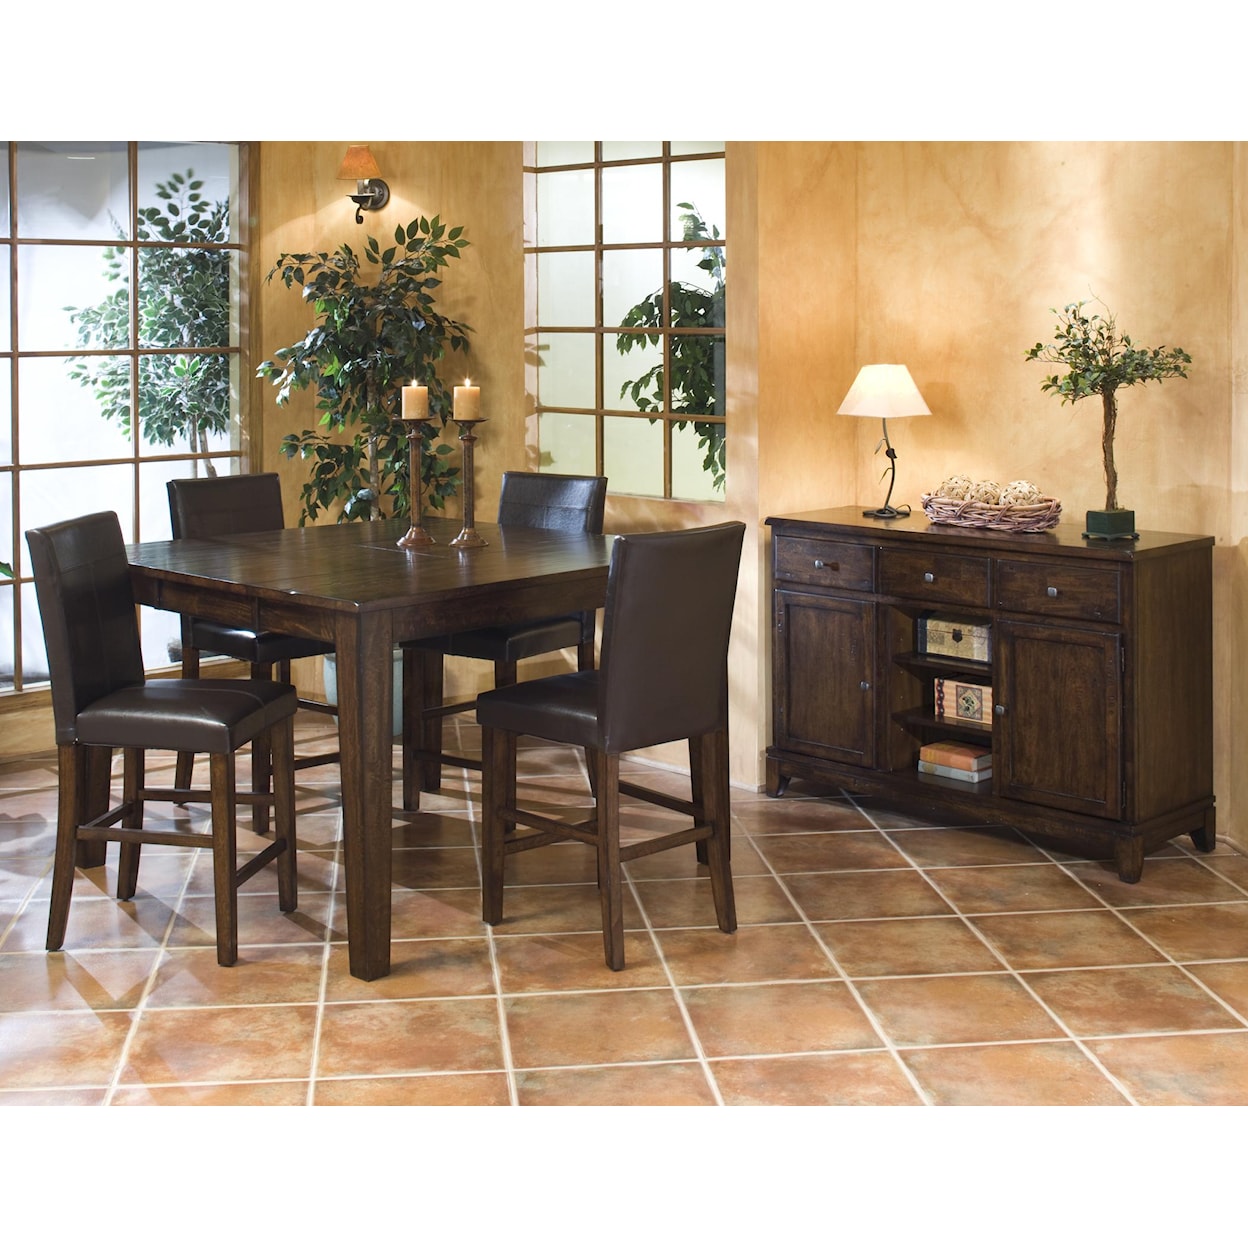 Belfort Select Cabin Creek Gathering Table with Butterfly Leaf